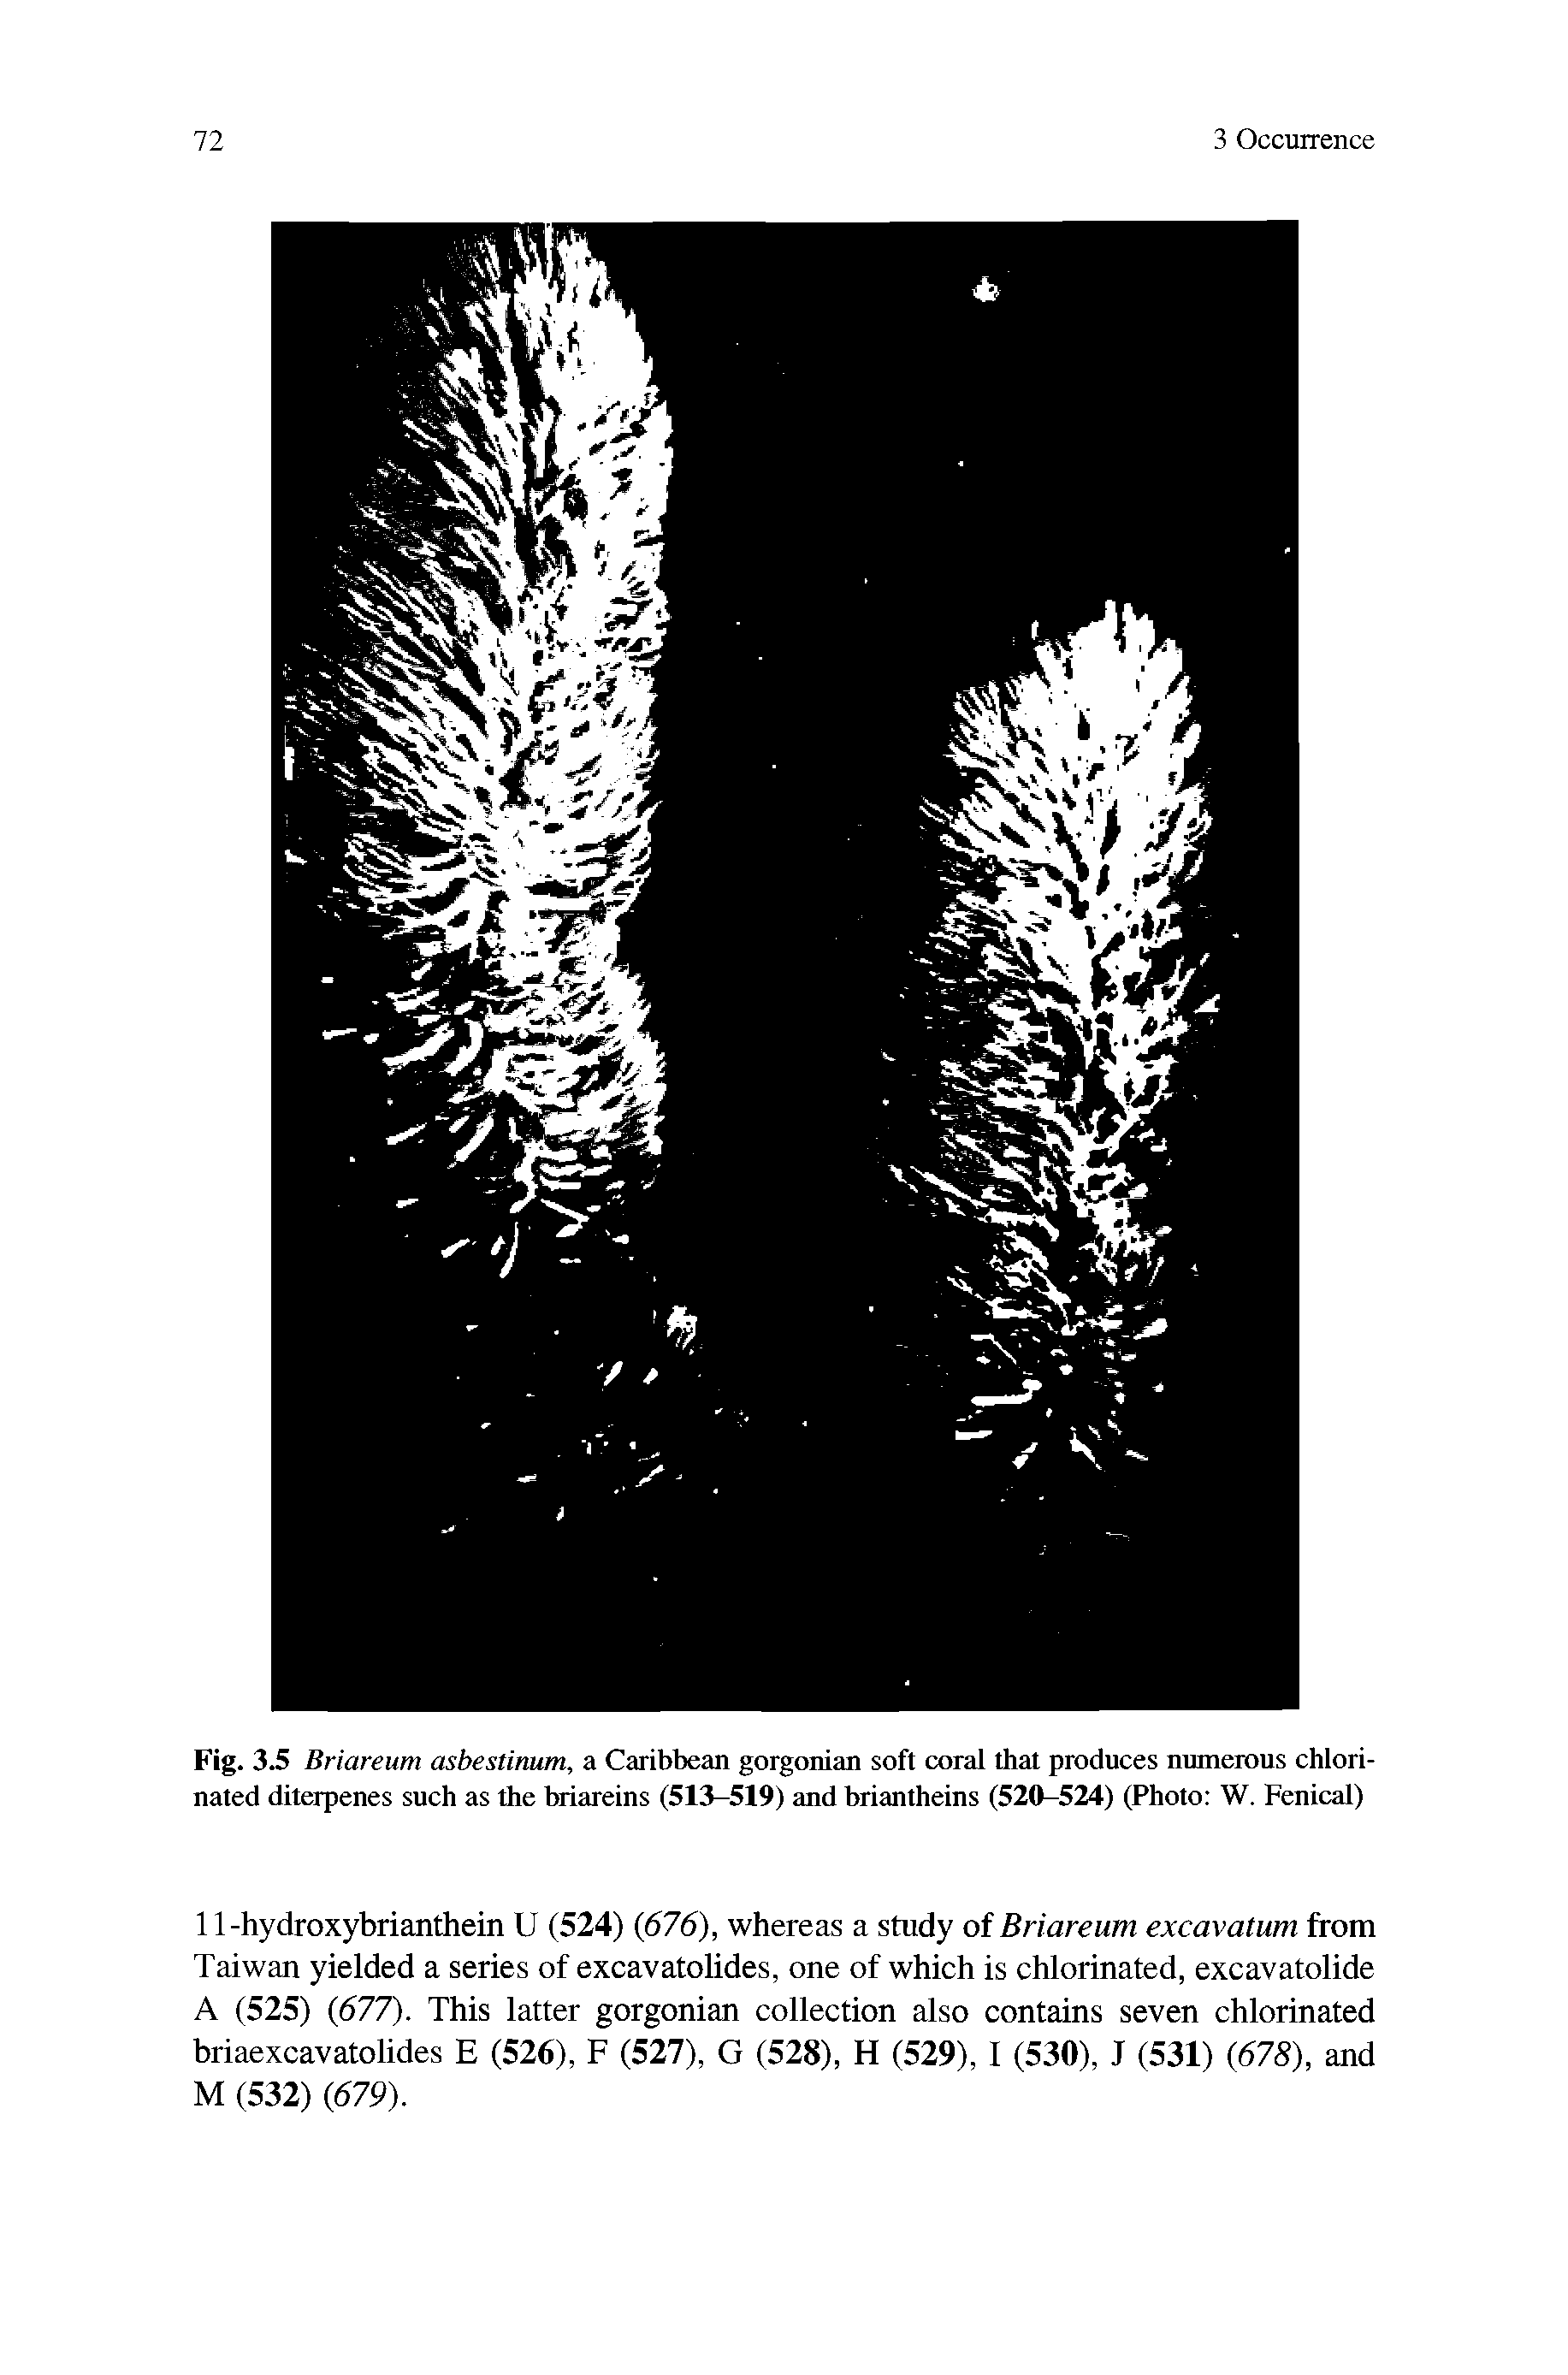 Fig. 3.5 Briareum asbestinum, a Caribbean gorgonian soft coral that produces numerous chlorinated diterpenes such as the briareins (513-519) and briantheins (520-524) (Photo W. Fenical)...